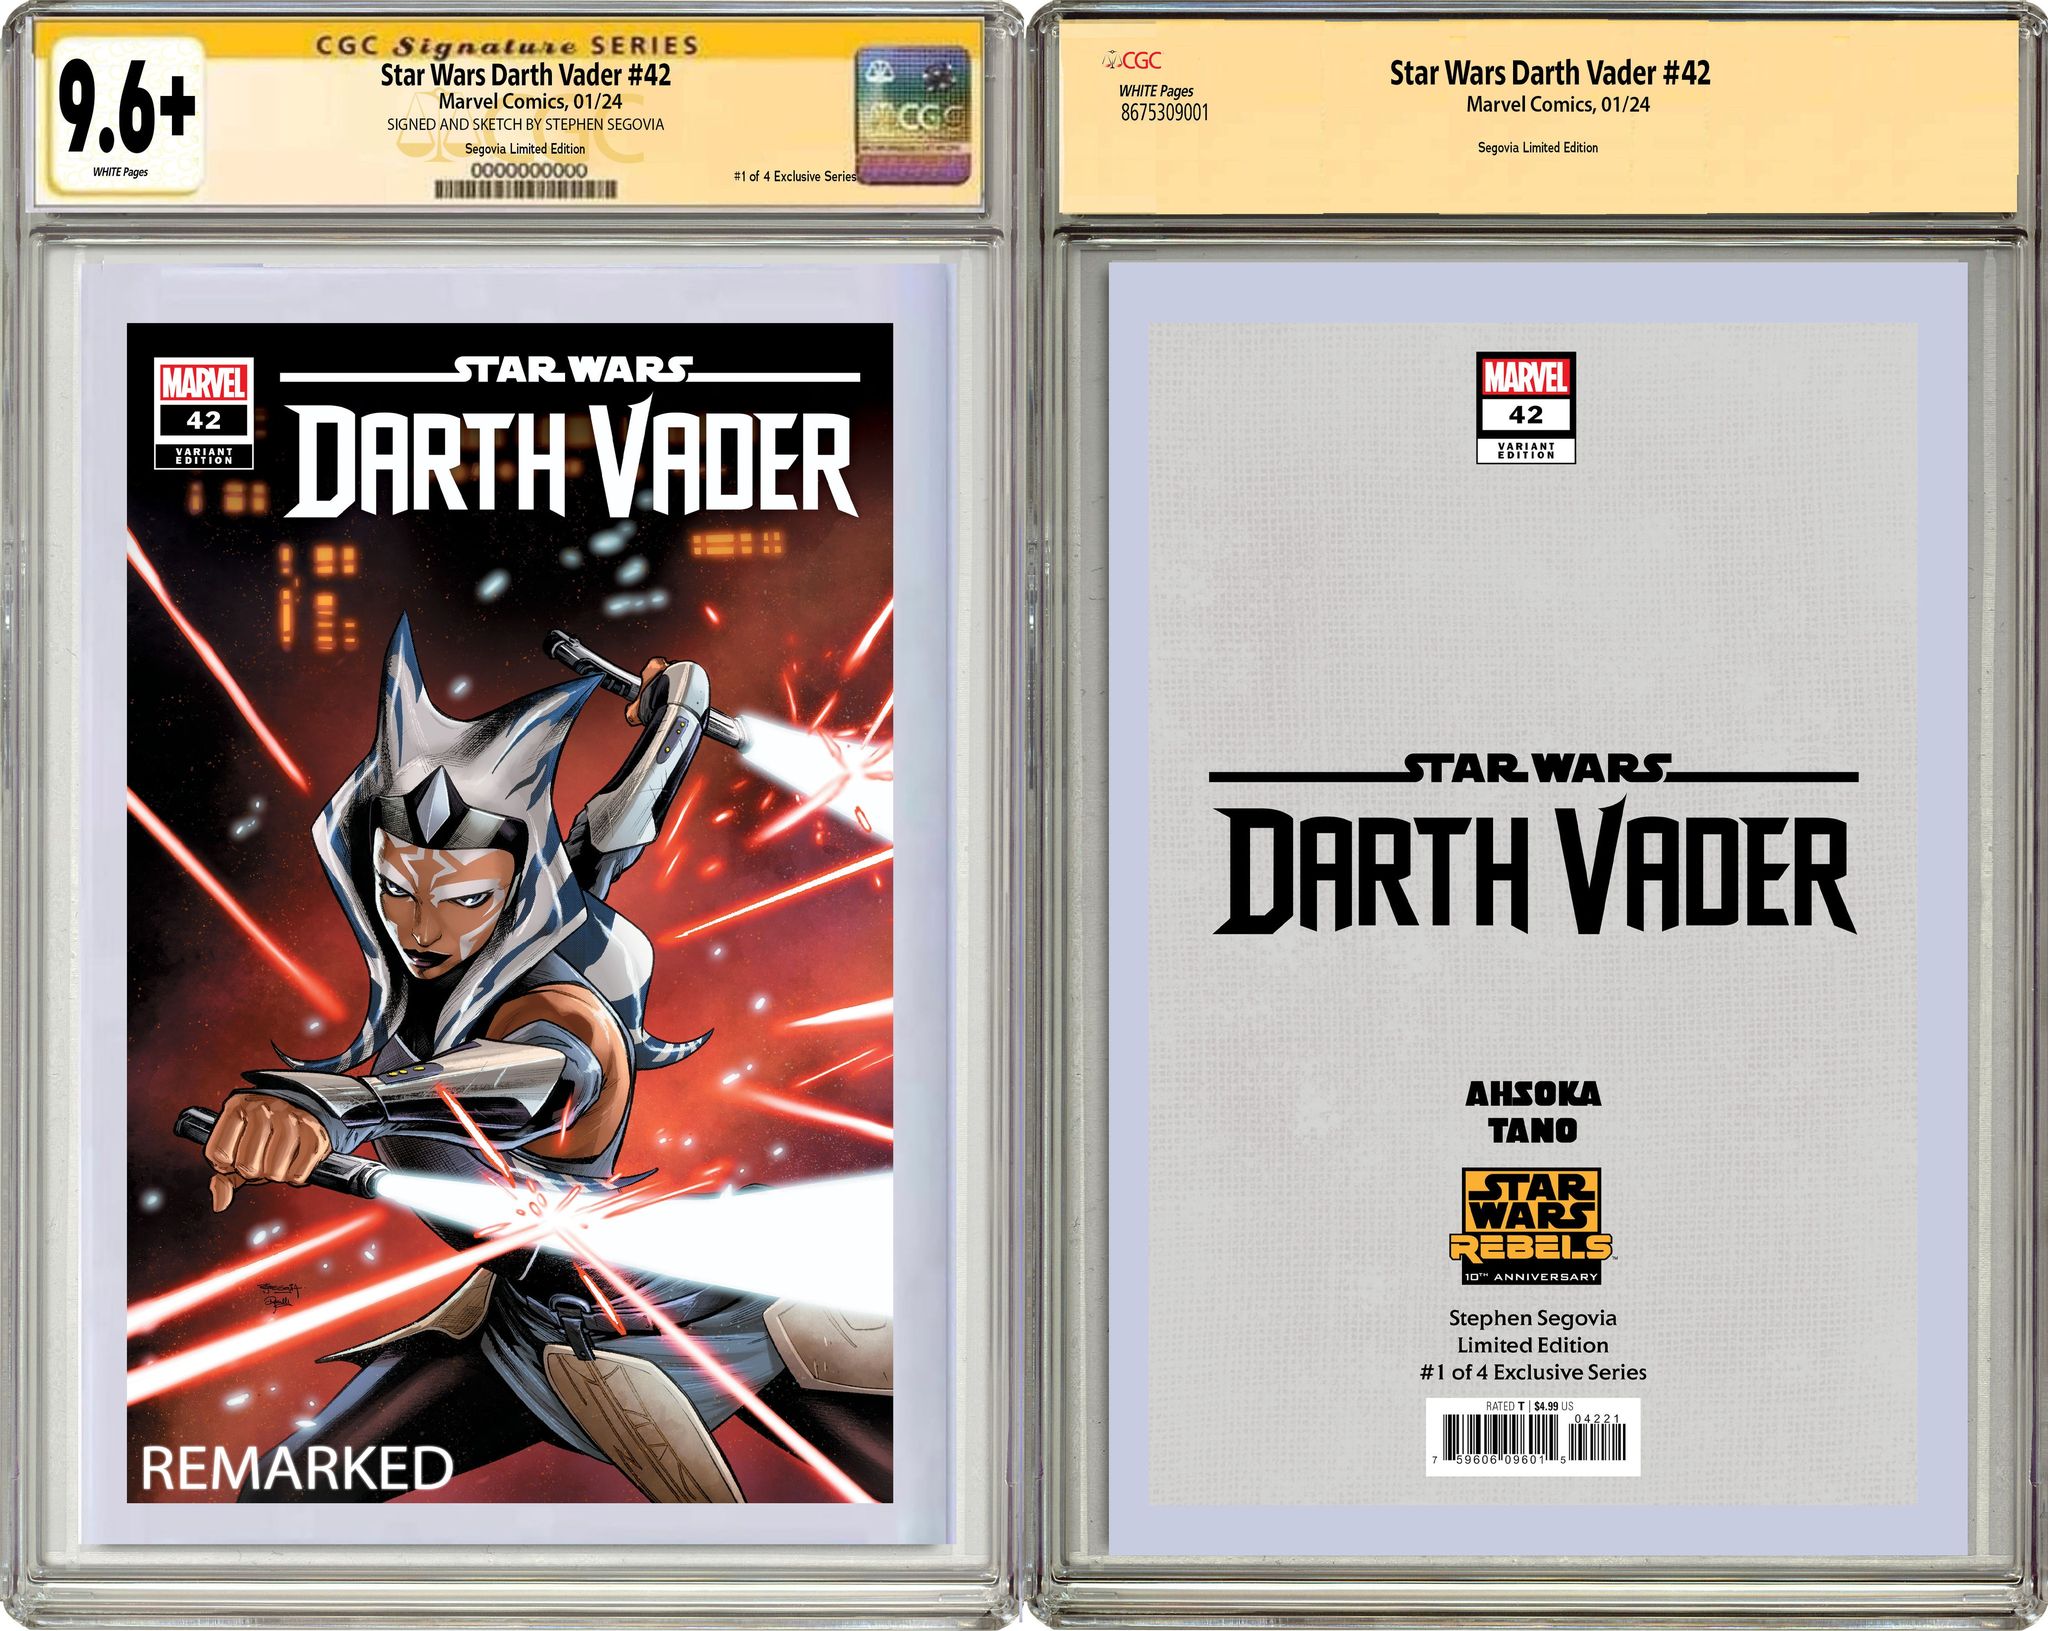 STAR WARS: DARTH VADER 42 STEPHEN SEGOVIA REBELS 10TH ANNIVERSARY LIMITED EDITION #1 OF 4 EXCLUSIVE SERIES OPTIONS- 01/03/24